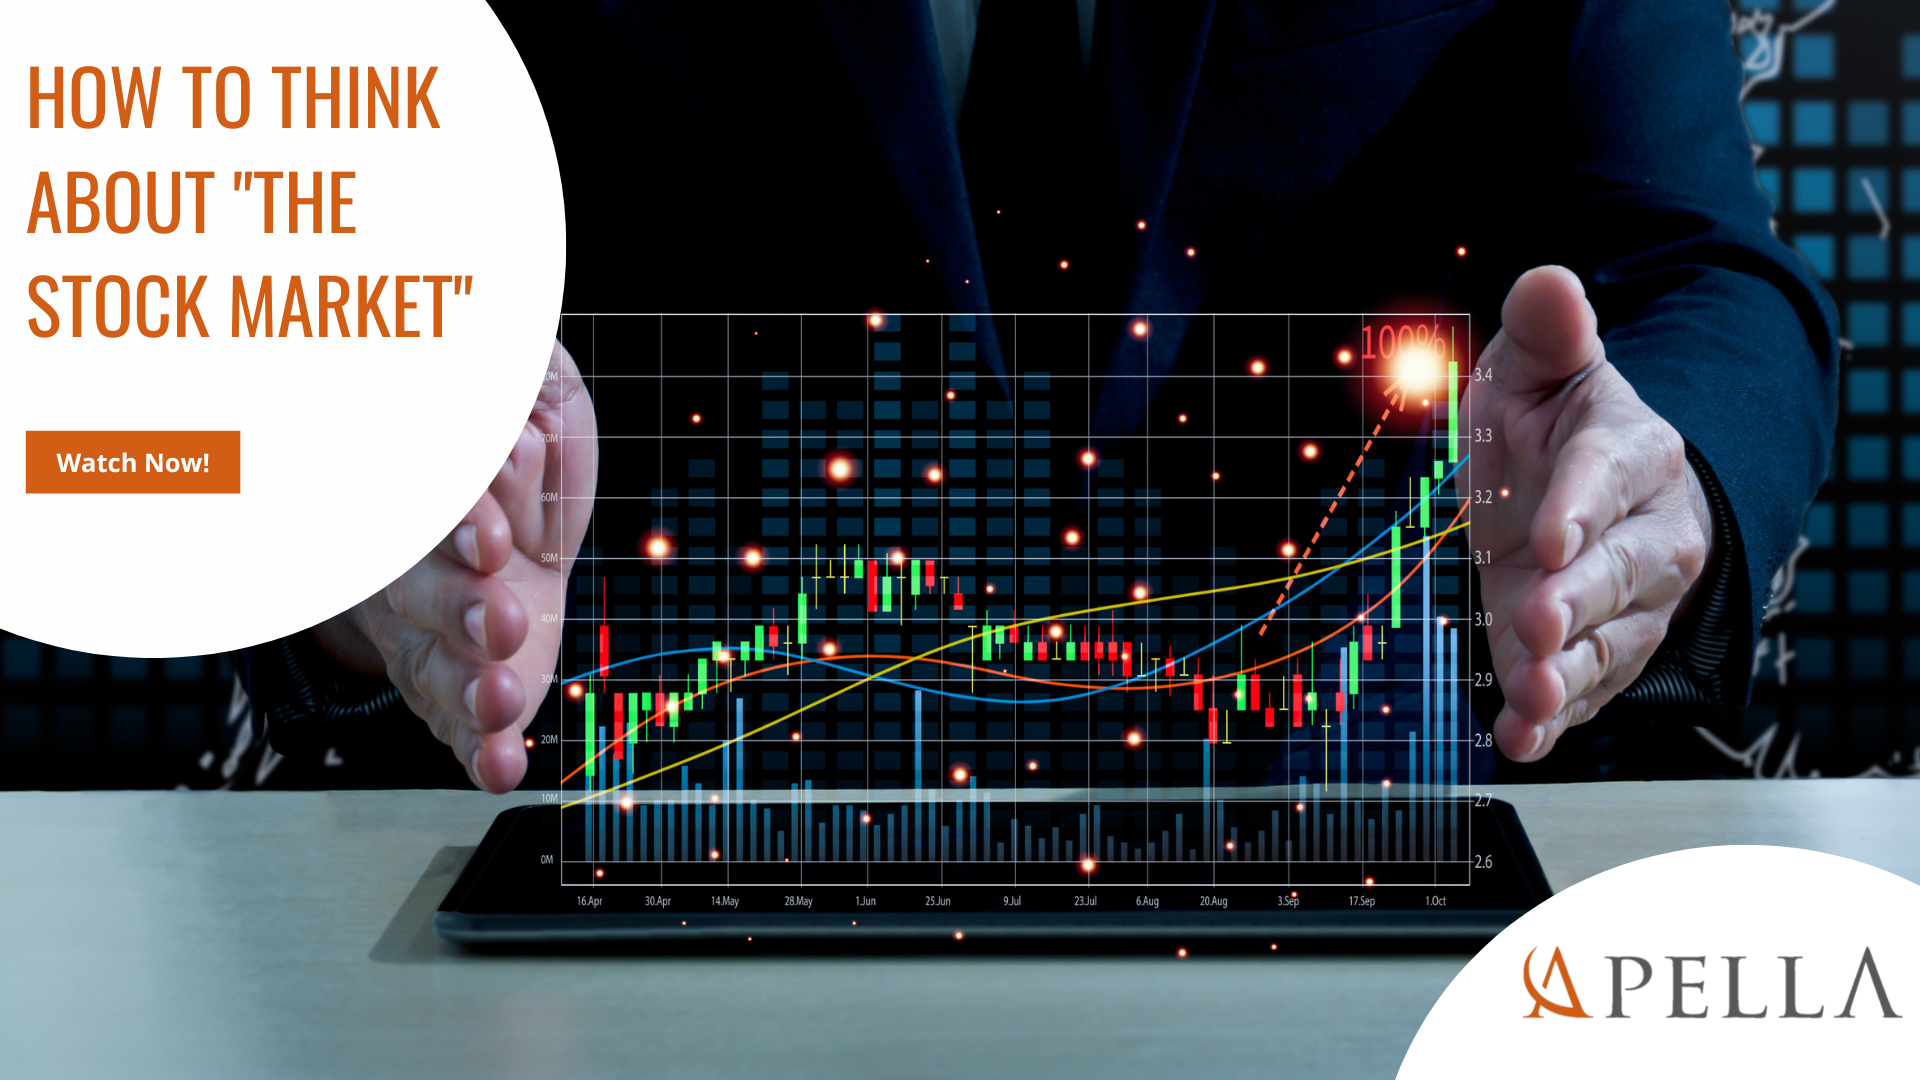 How to Think About The Stock Market (Facebook Event Cover)-4